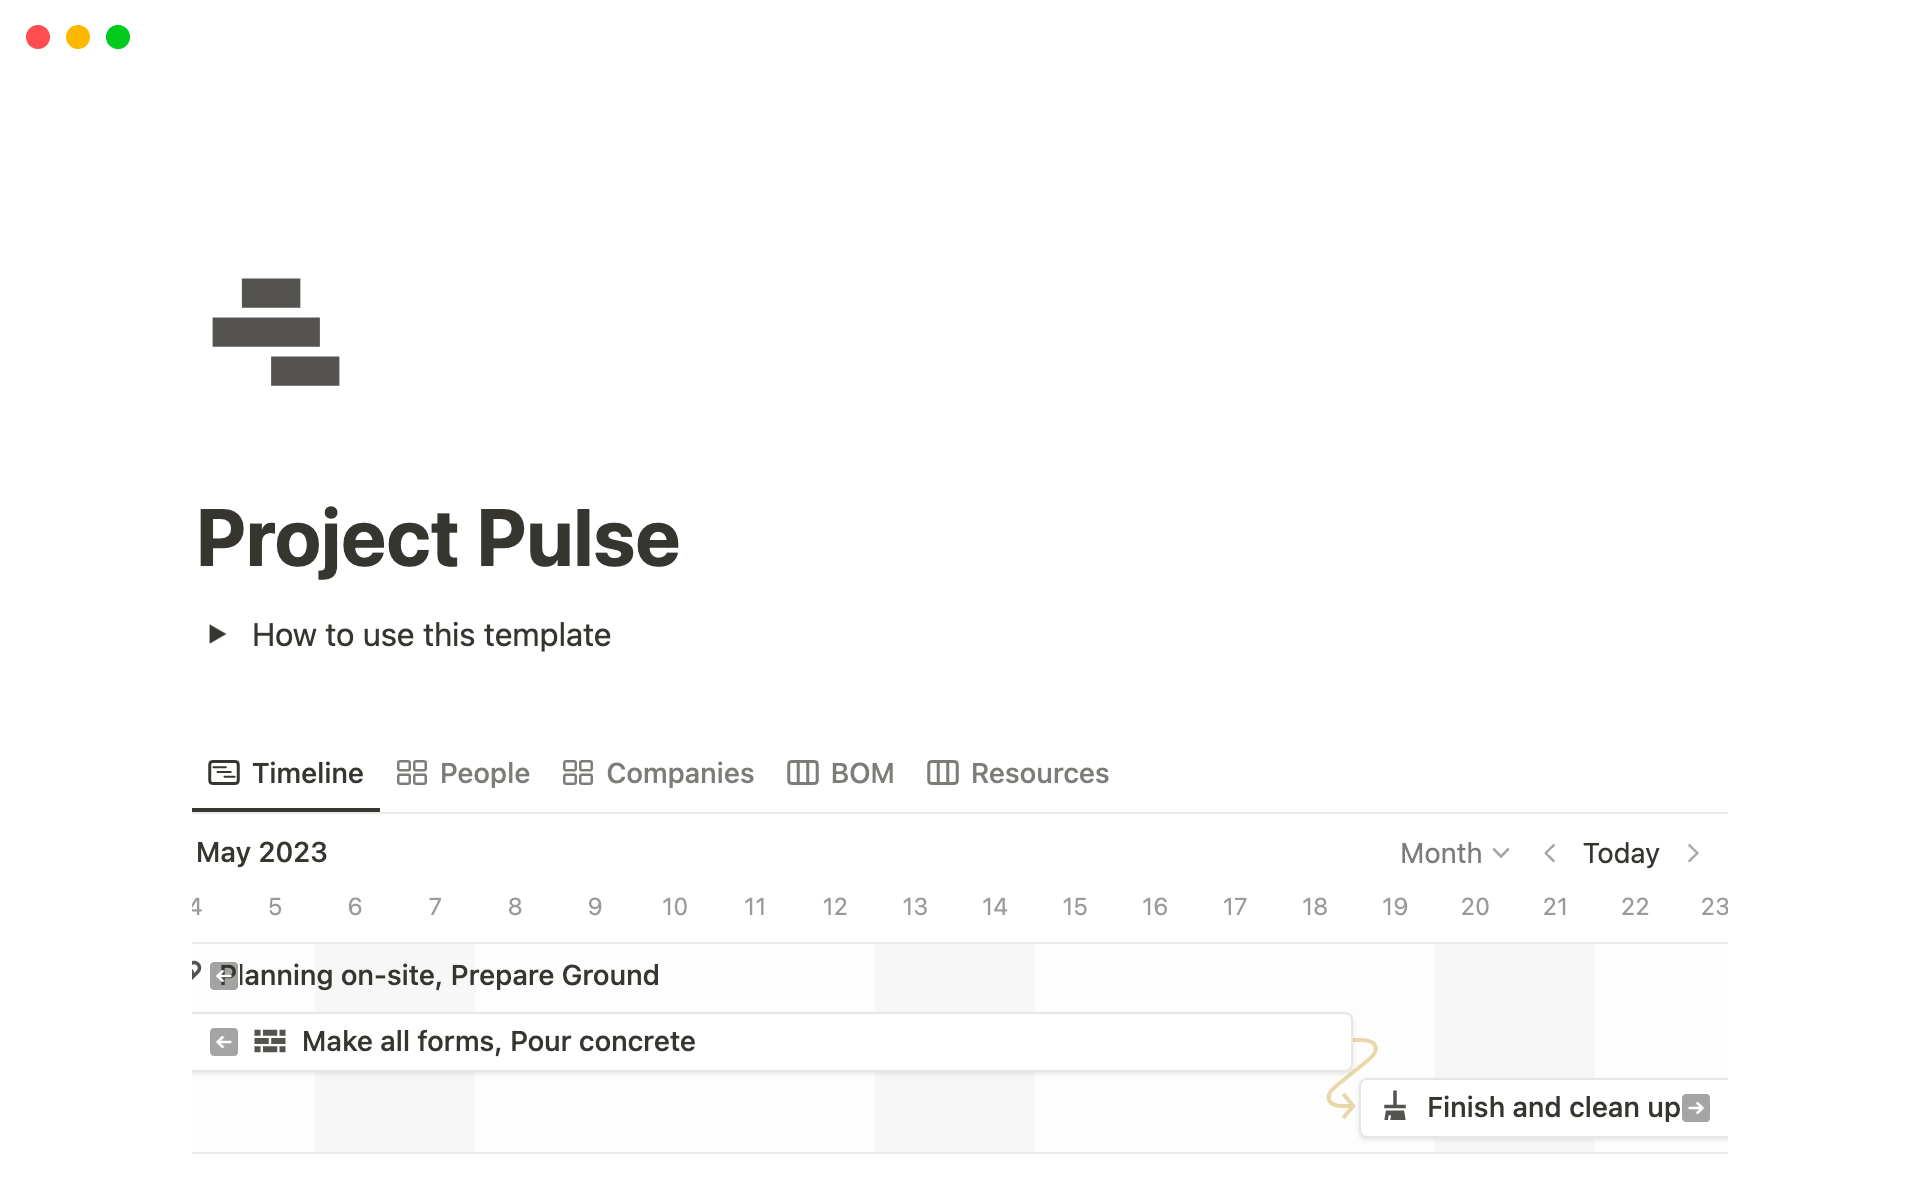 Project Pulse centralizes all aspects of your projects, from project information, stakeholders, resources, and bill of materials, to tasks, timelines, and due dates.